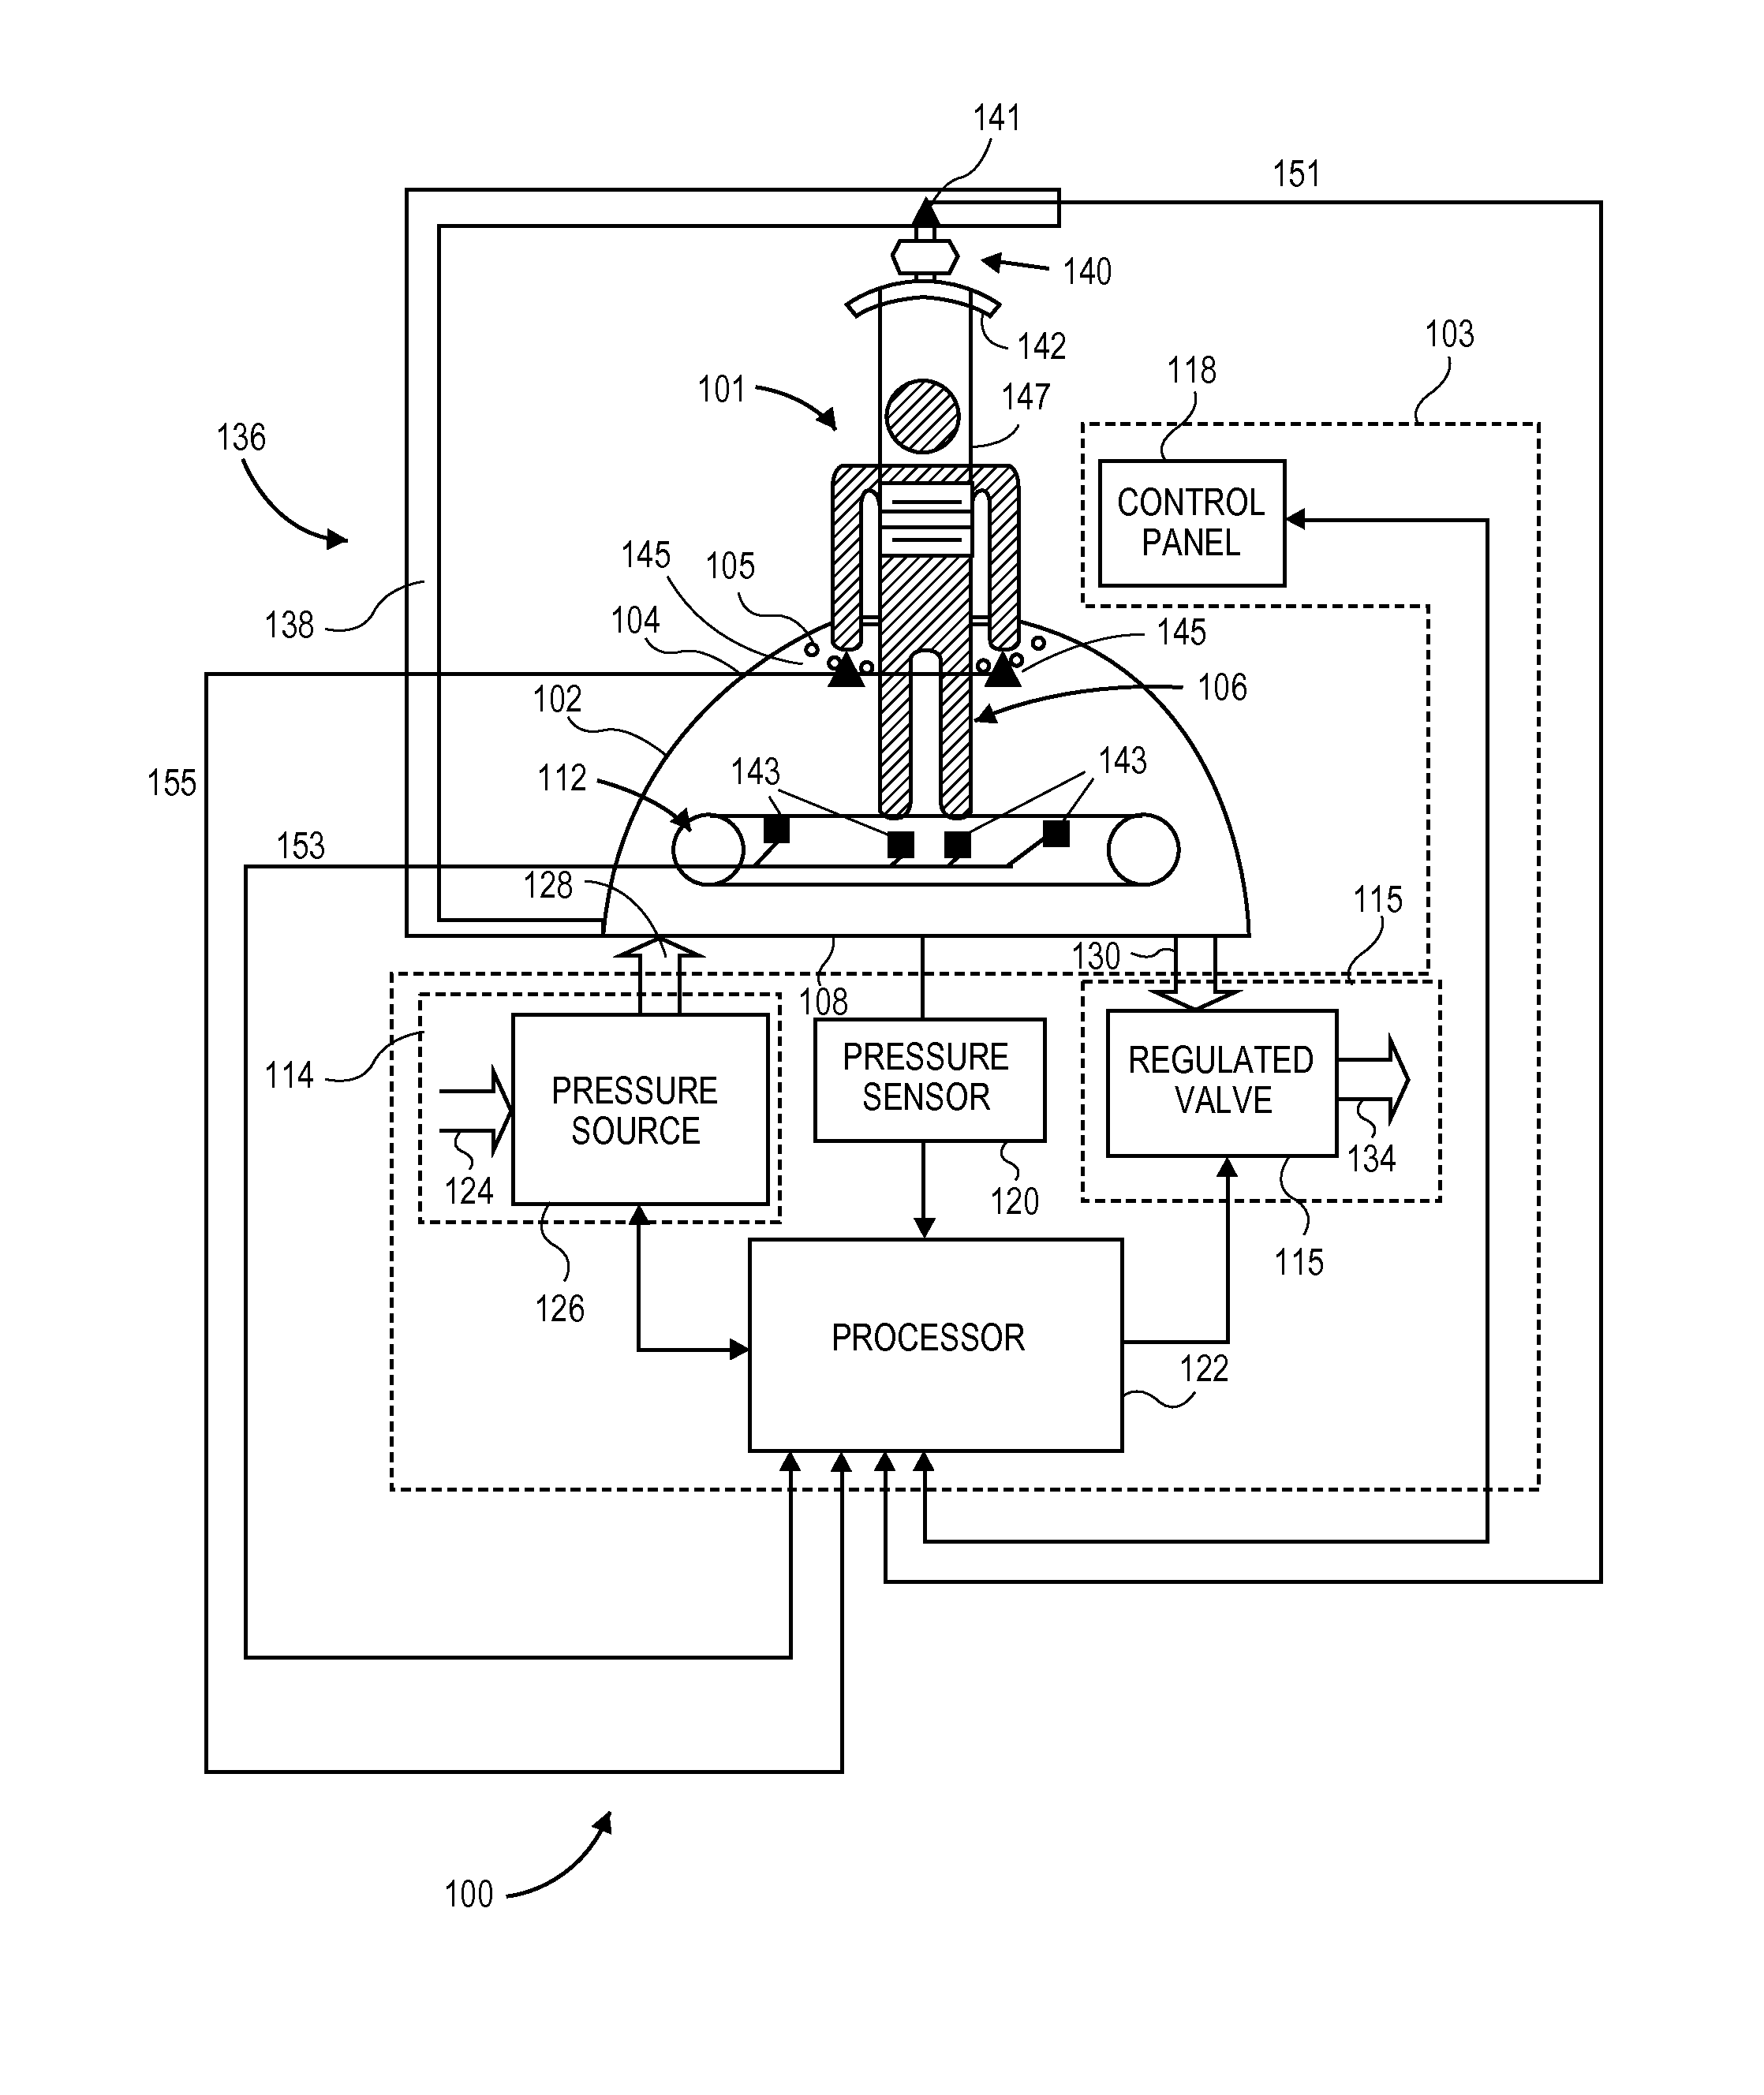 Differential air pressure systems and methods of using and calibrating such systems for mobility impaired users